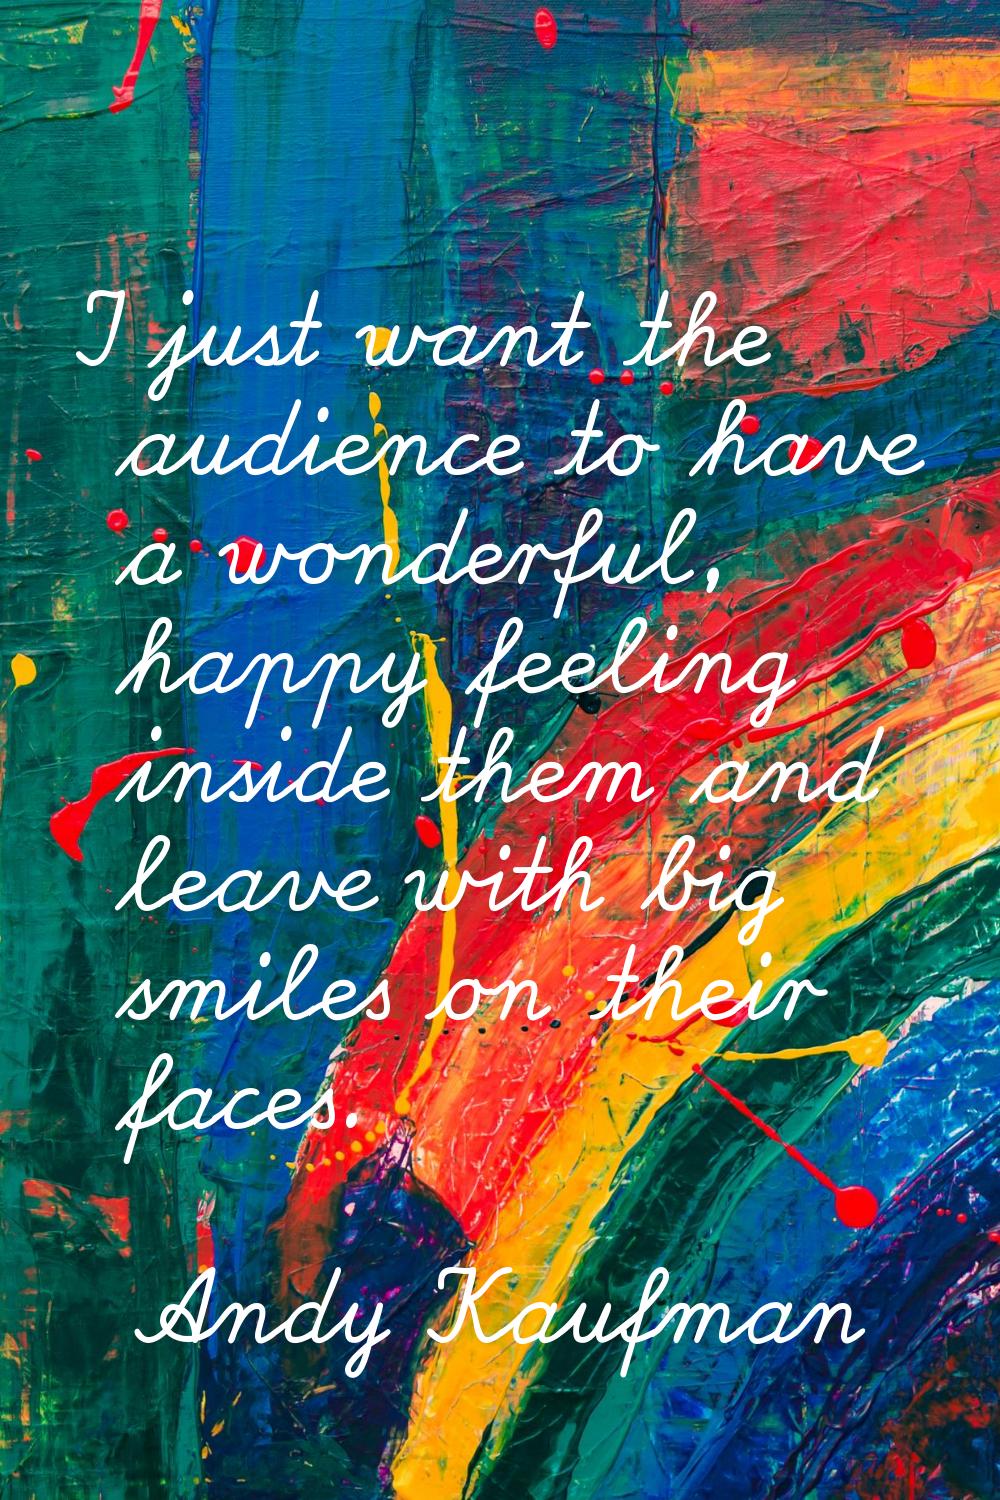 I just want the audience to have a wonderful, happy feeling inside them and leave with big smiles o